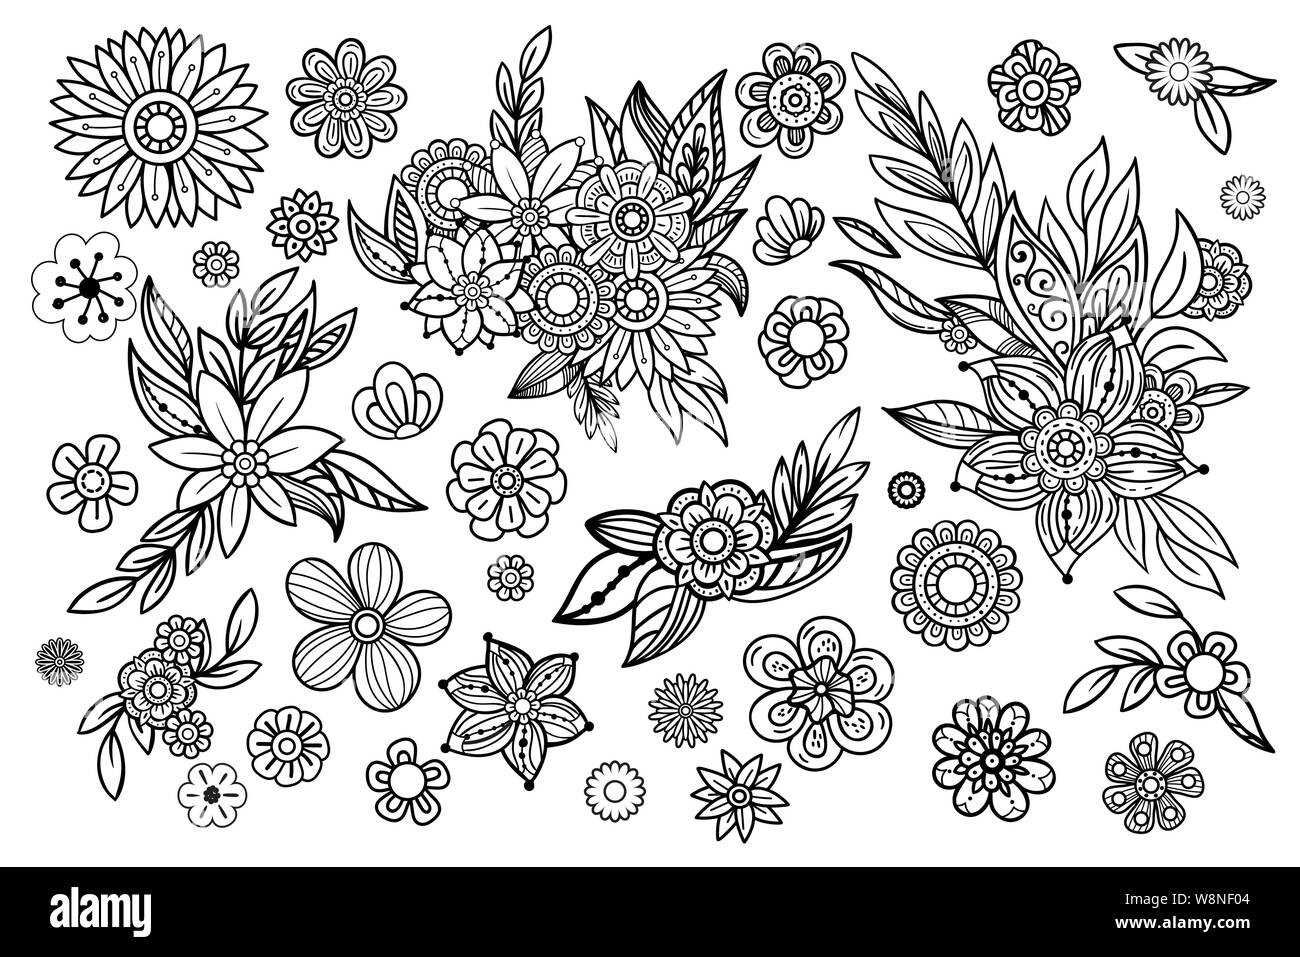 Hand drawn leaves and flowers collection. Floral design elements set. Black and white vector illustration in doodles style. Isolated on white background. Stock Vector